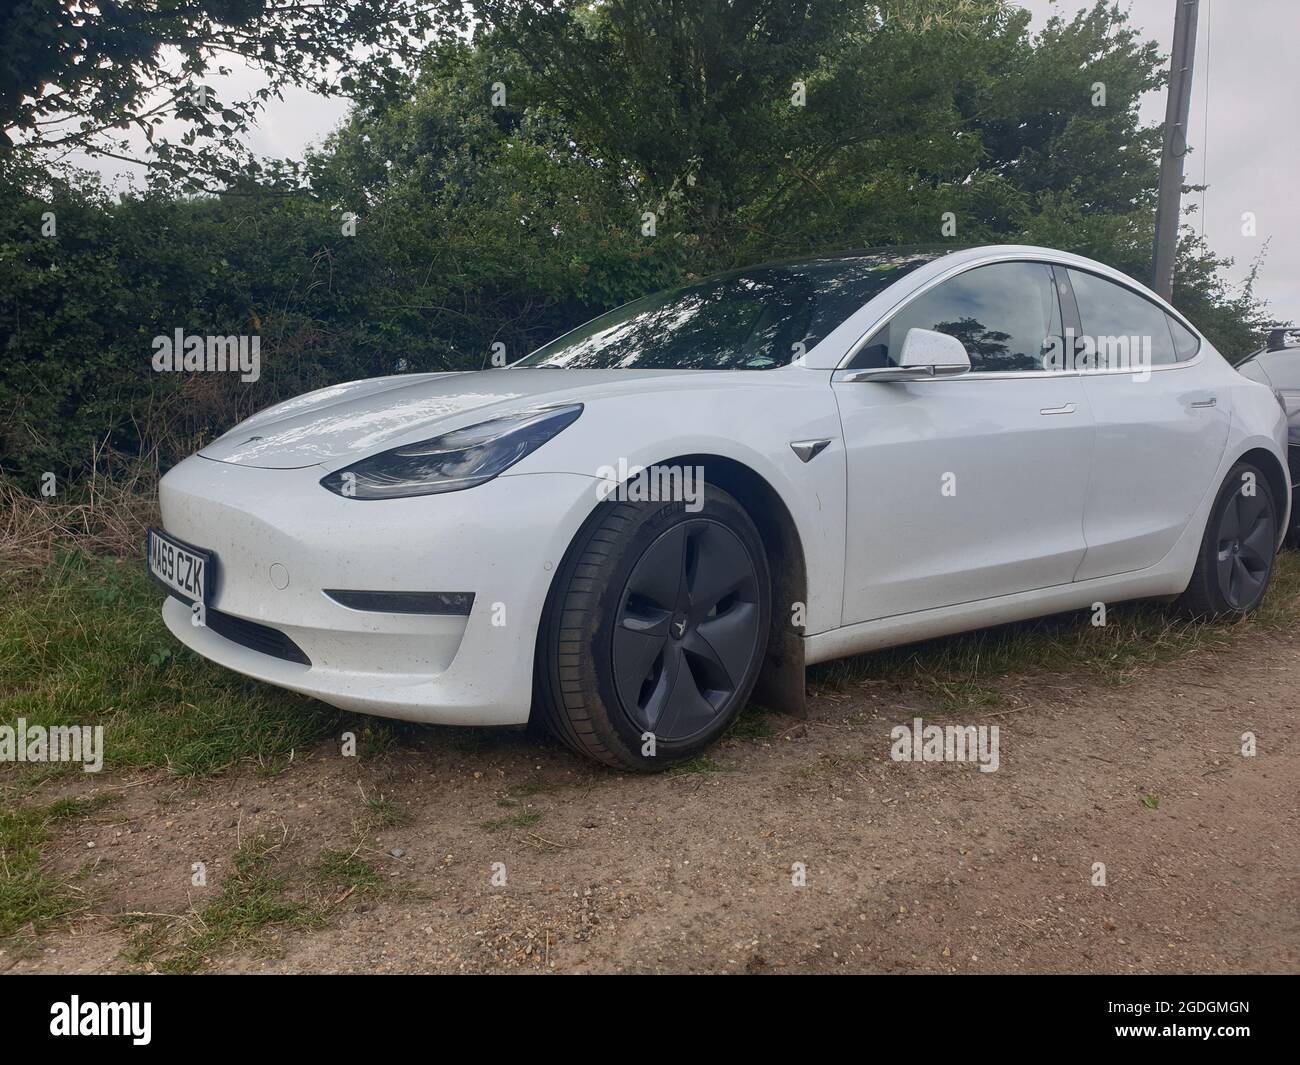 Sutton Suffolk UK August 12 2021: A 2019 model Tesla Model 3 Long-Range Dual Motor AWD electric vehicle parked in a small countryside village in Suffo Stock Photo